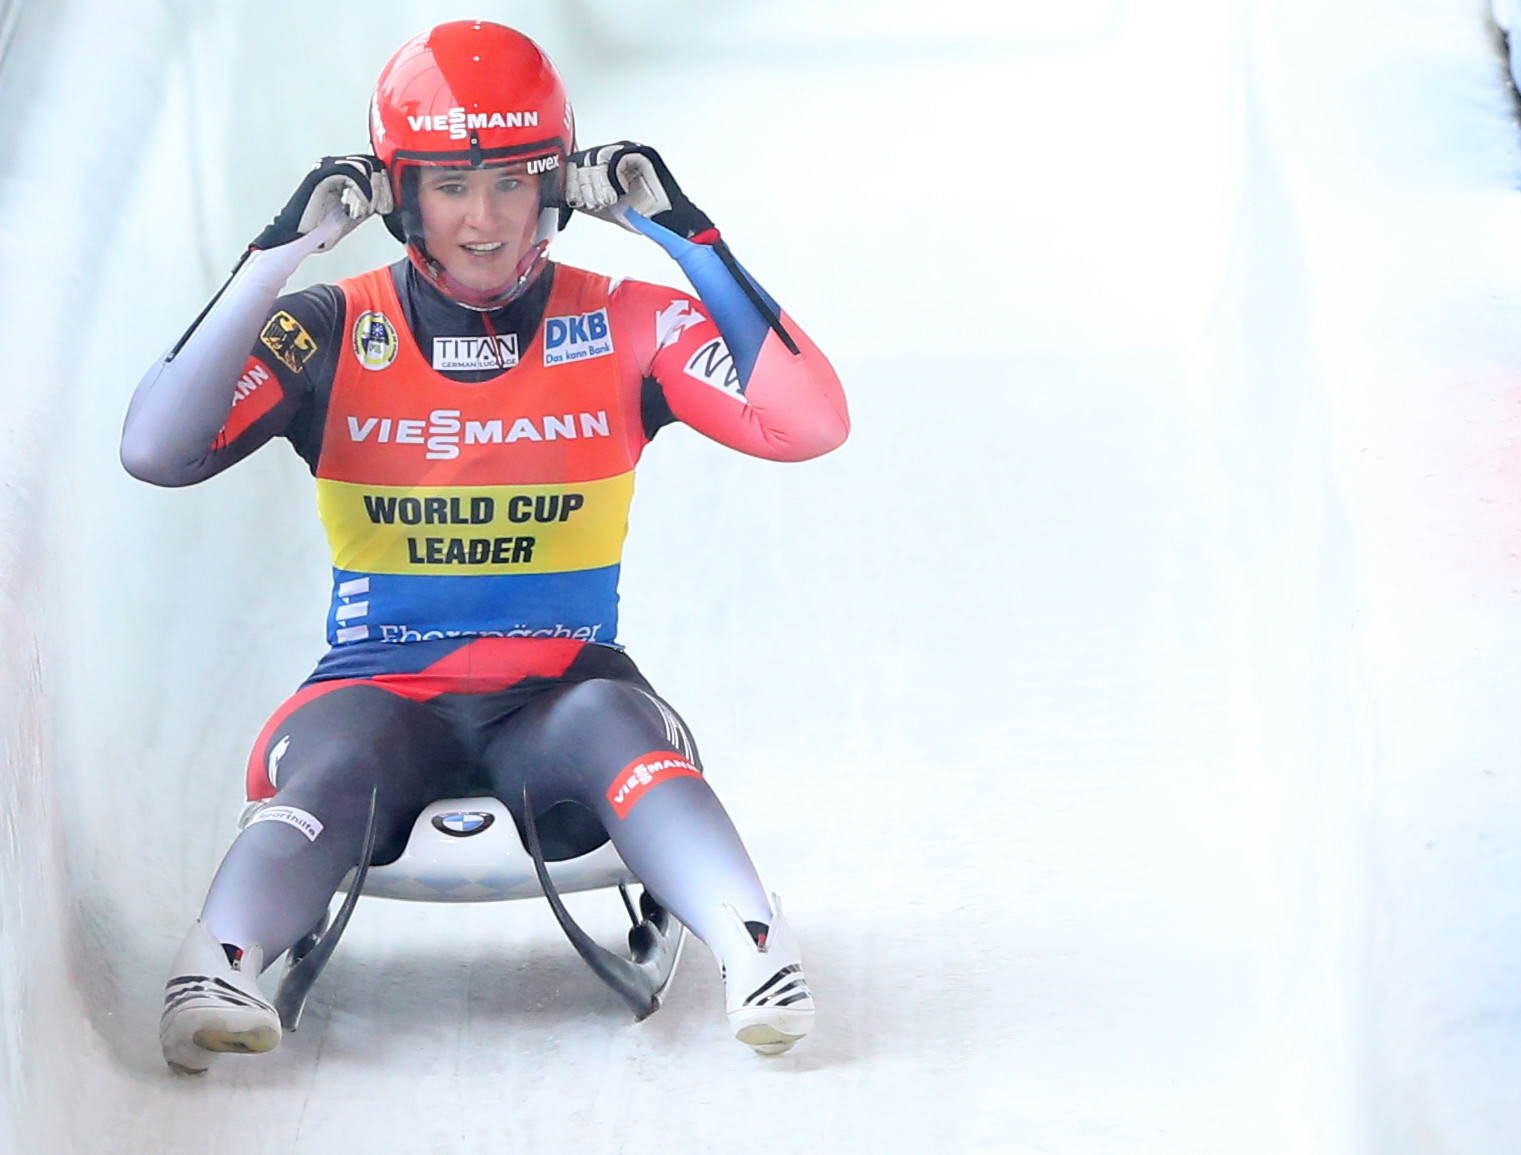 Geisenberger secures gold at FIL World Cup in Lake Placid